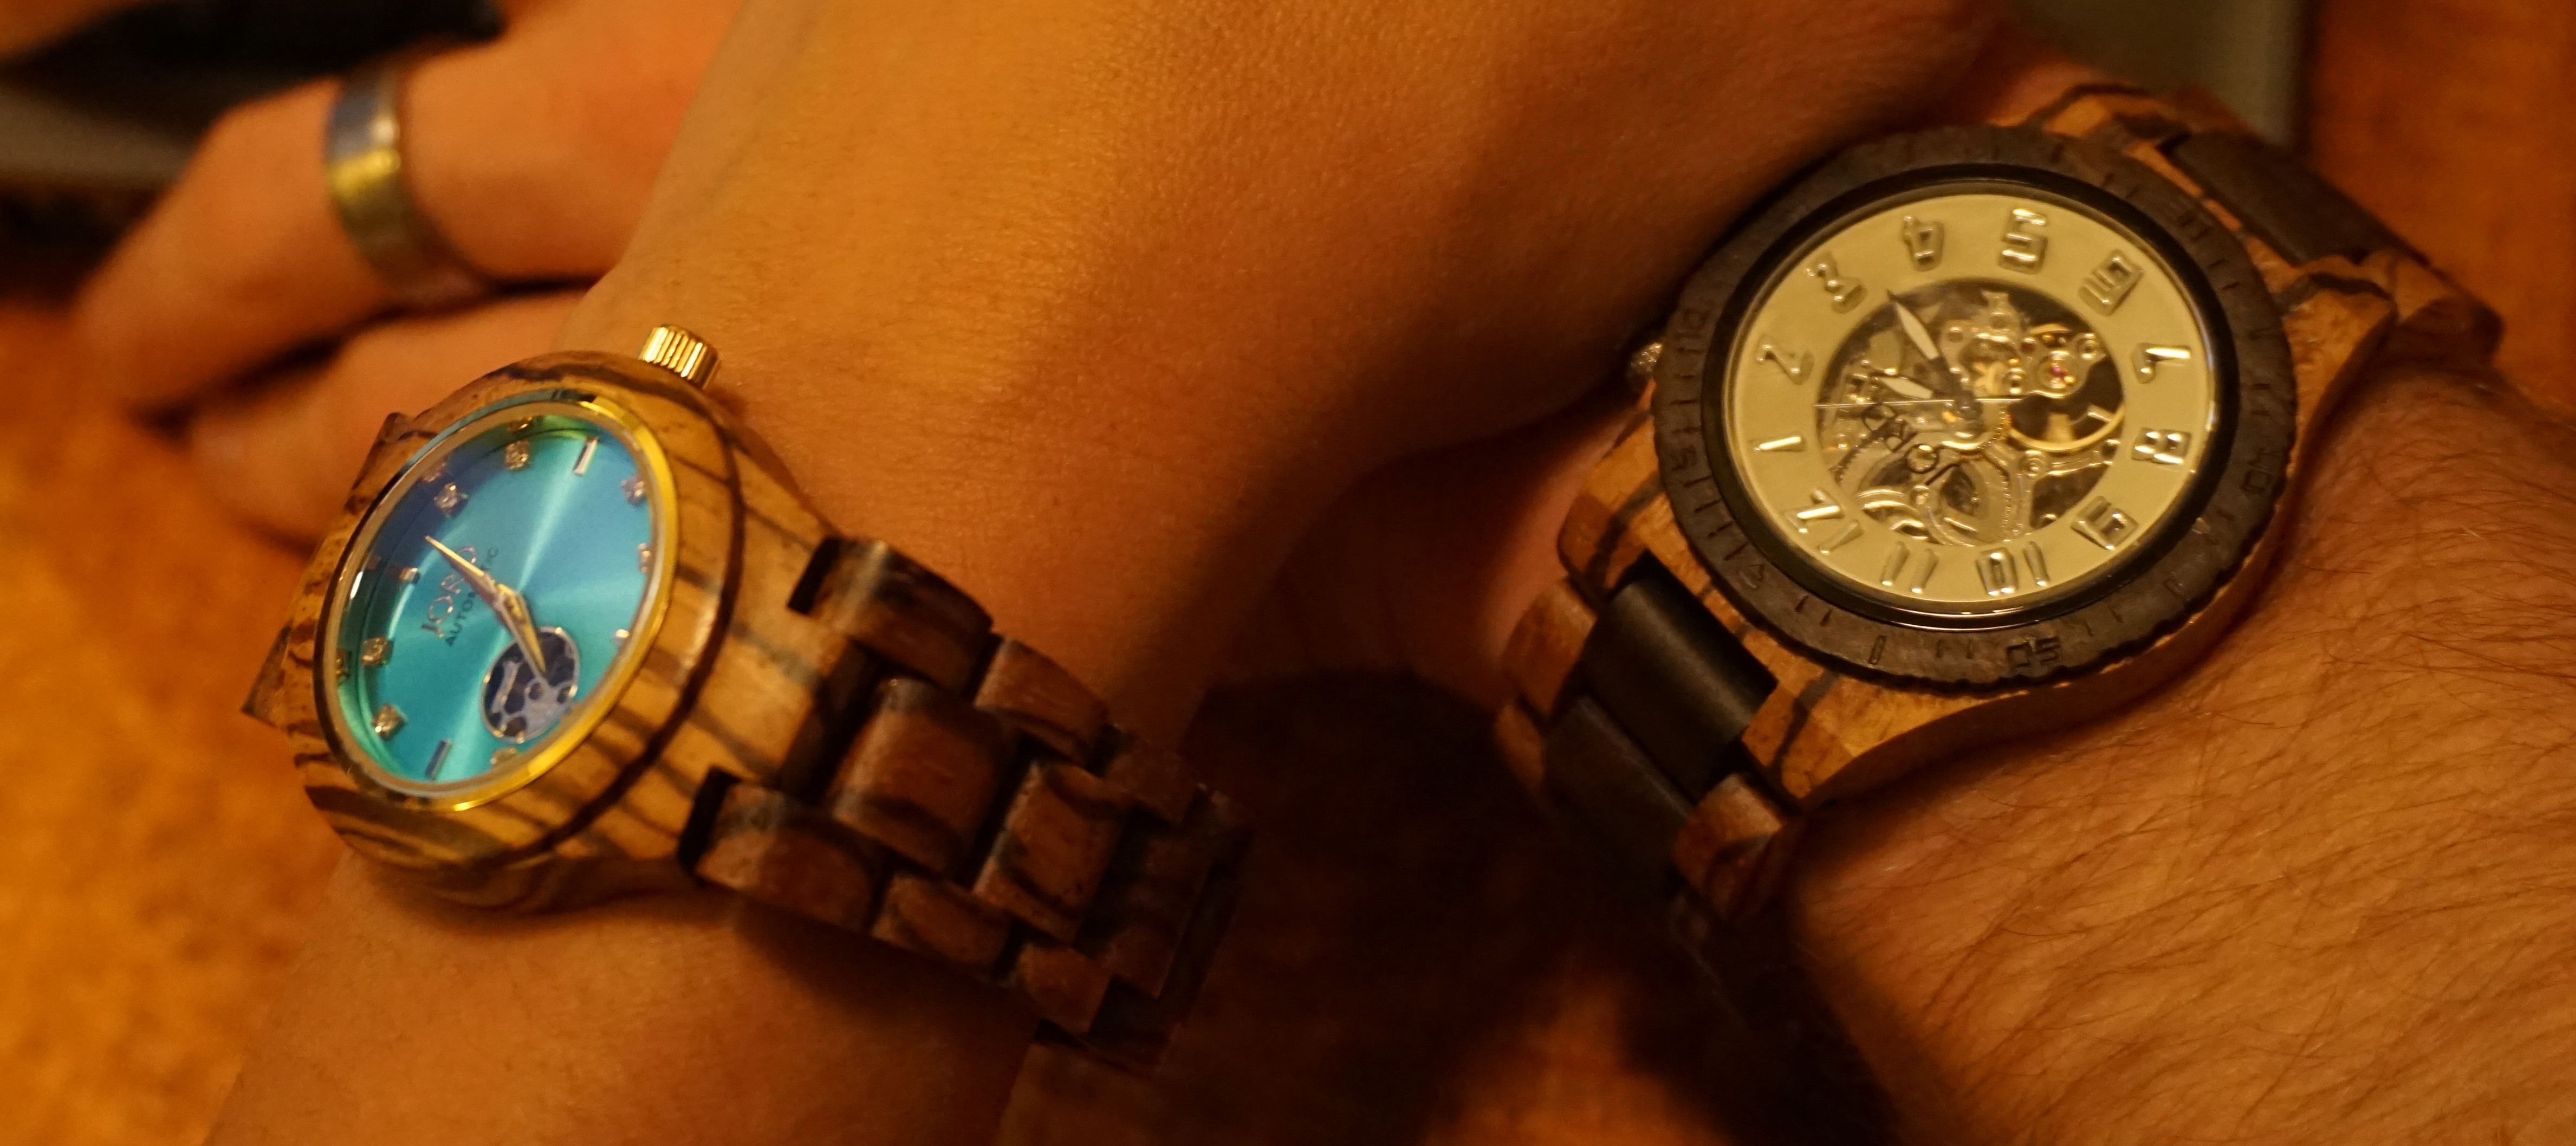 Doing Good While Looking Good: 100% Natural Wood JORD Watch